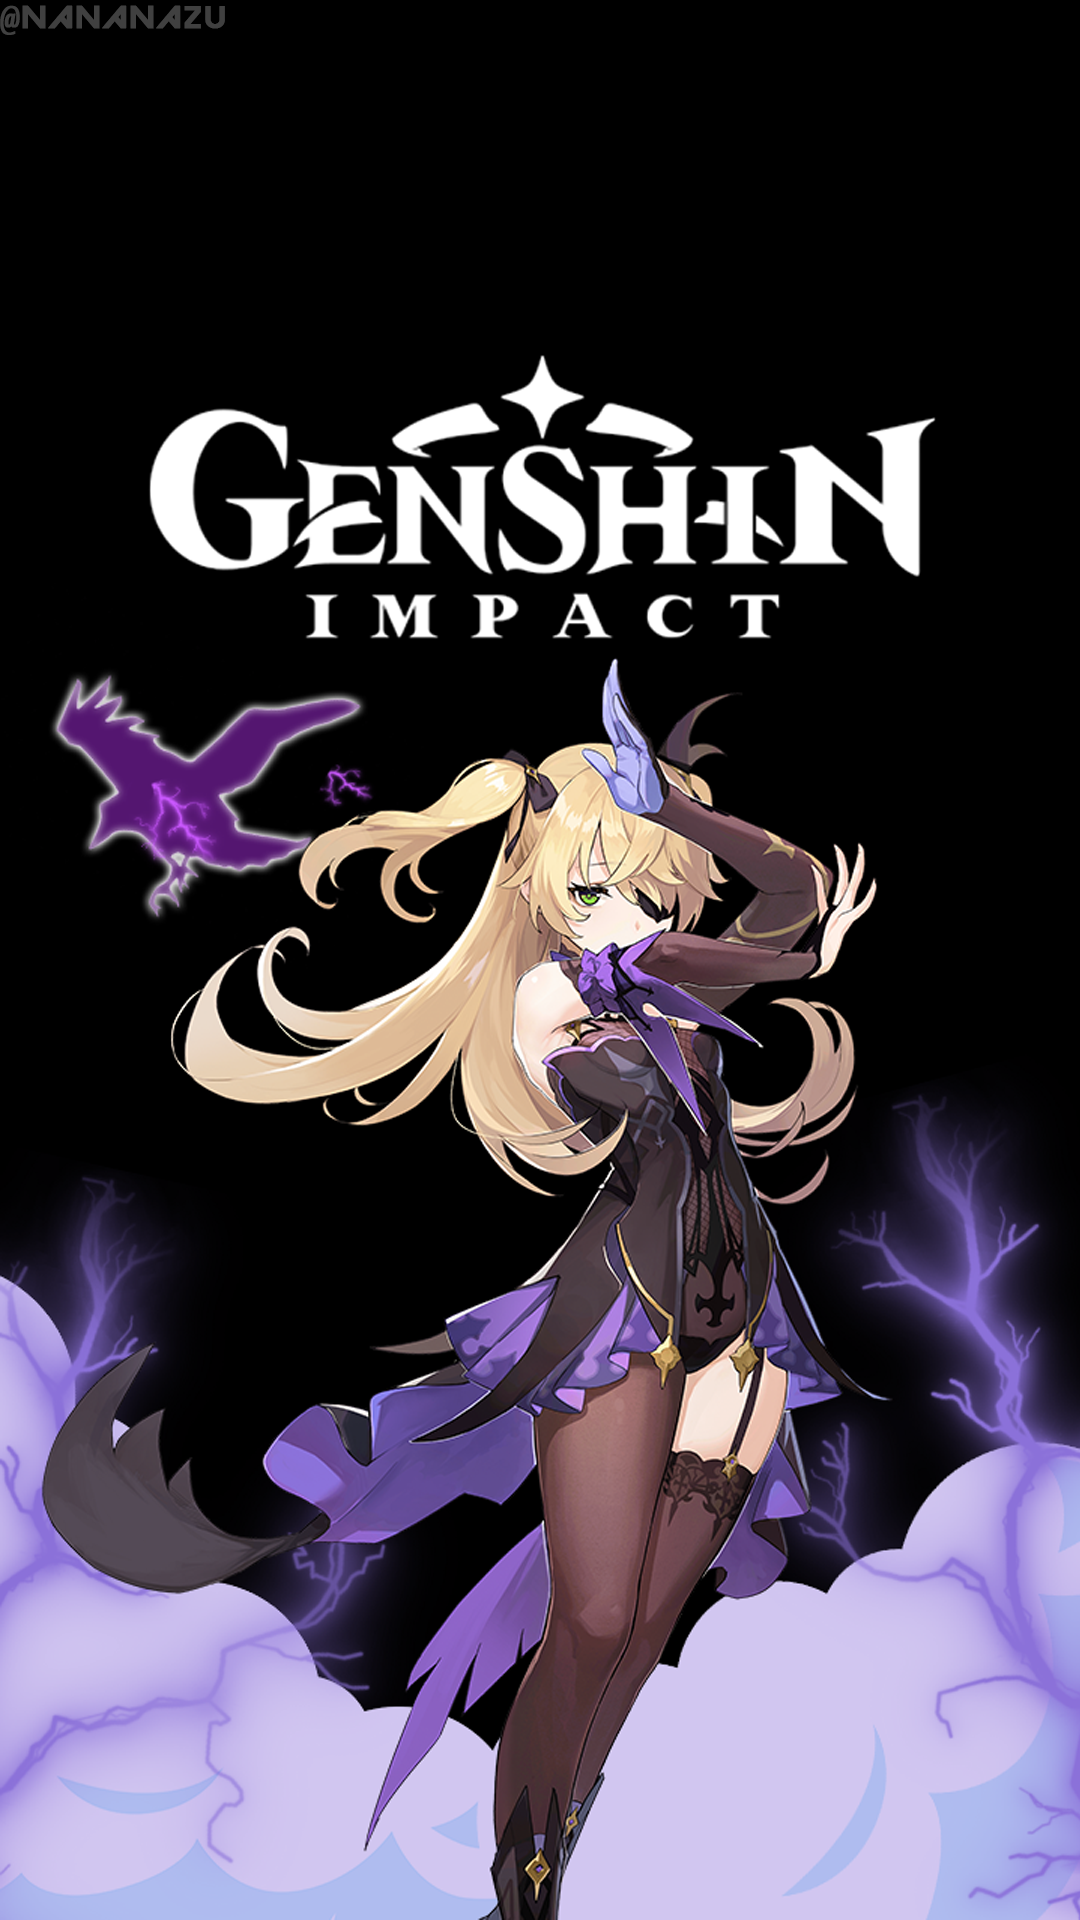 Genshin Impact Fischl Wallpaper Android. Cute anime character, Impact, Anime